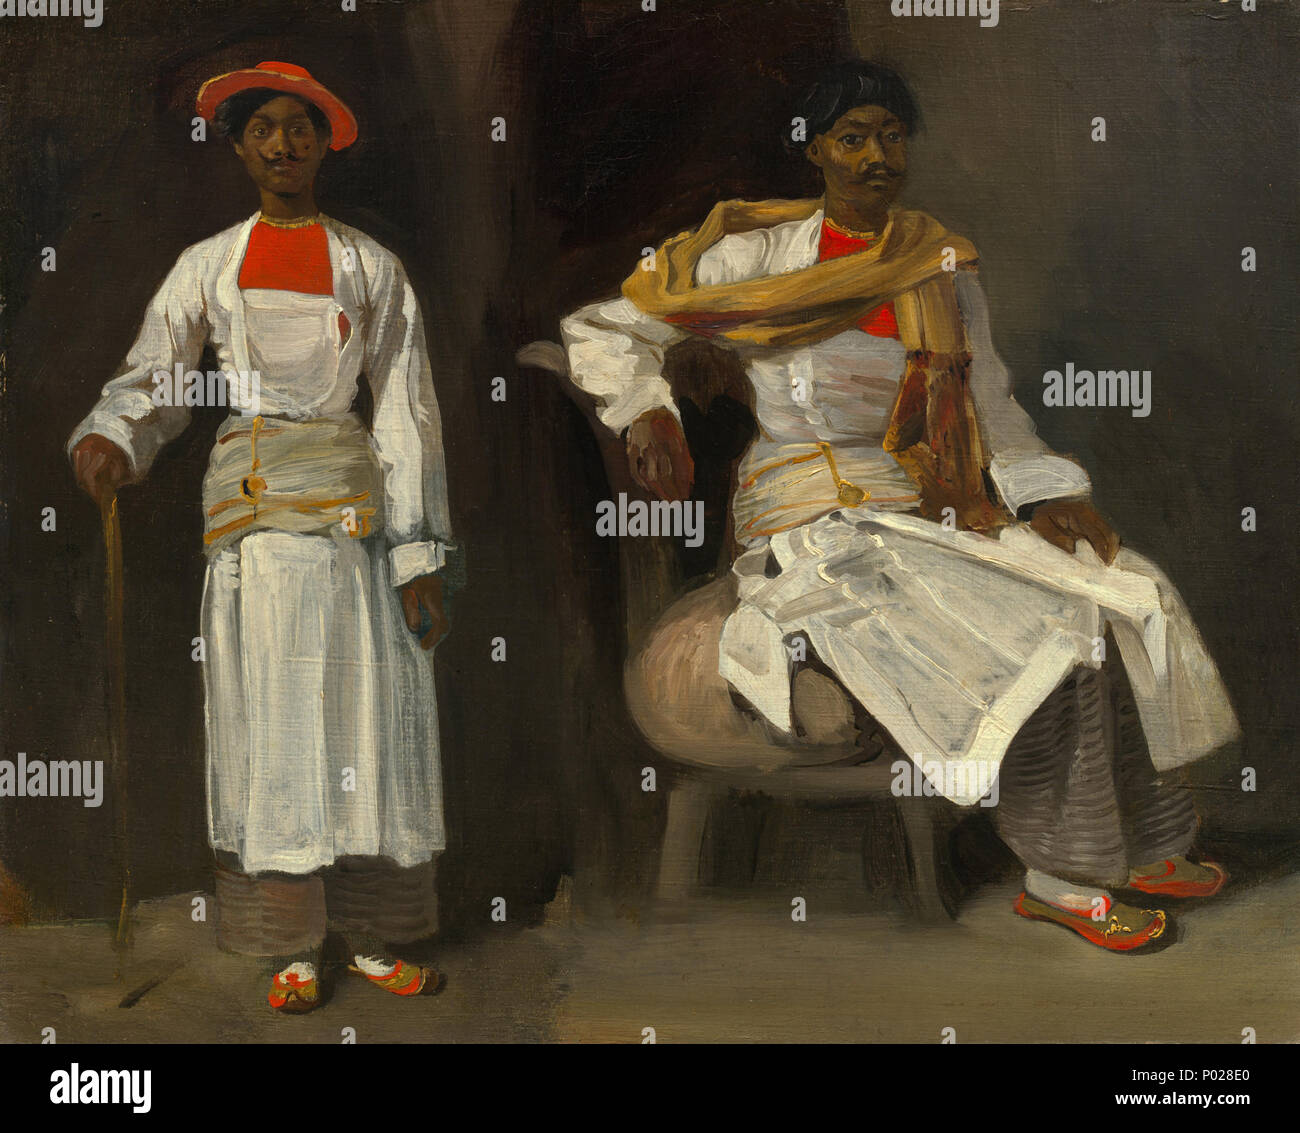 Painting; oil on canvas; overall: 37.5 x 45.7 cm (14 3/4 x 18 in.) framed: 51.1 x 59.5 x 3.8 cm (20 1/8 x 23 7/16 x 1 1/2 in.); 24 Two Studies of an Indian from Calcutta, Seated and Standing A11122 Stock Photo